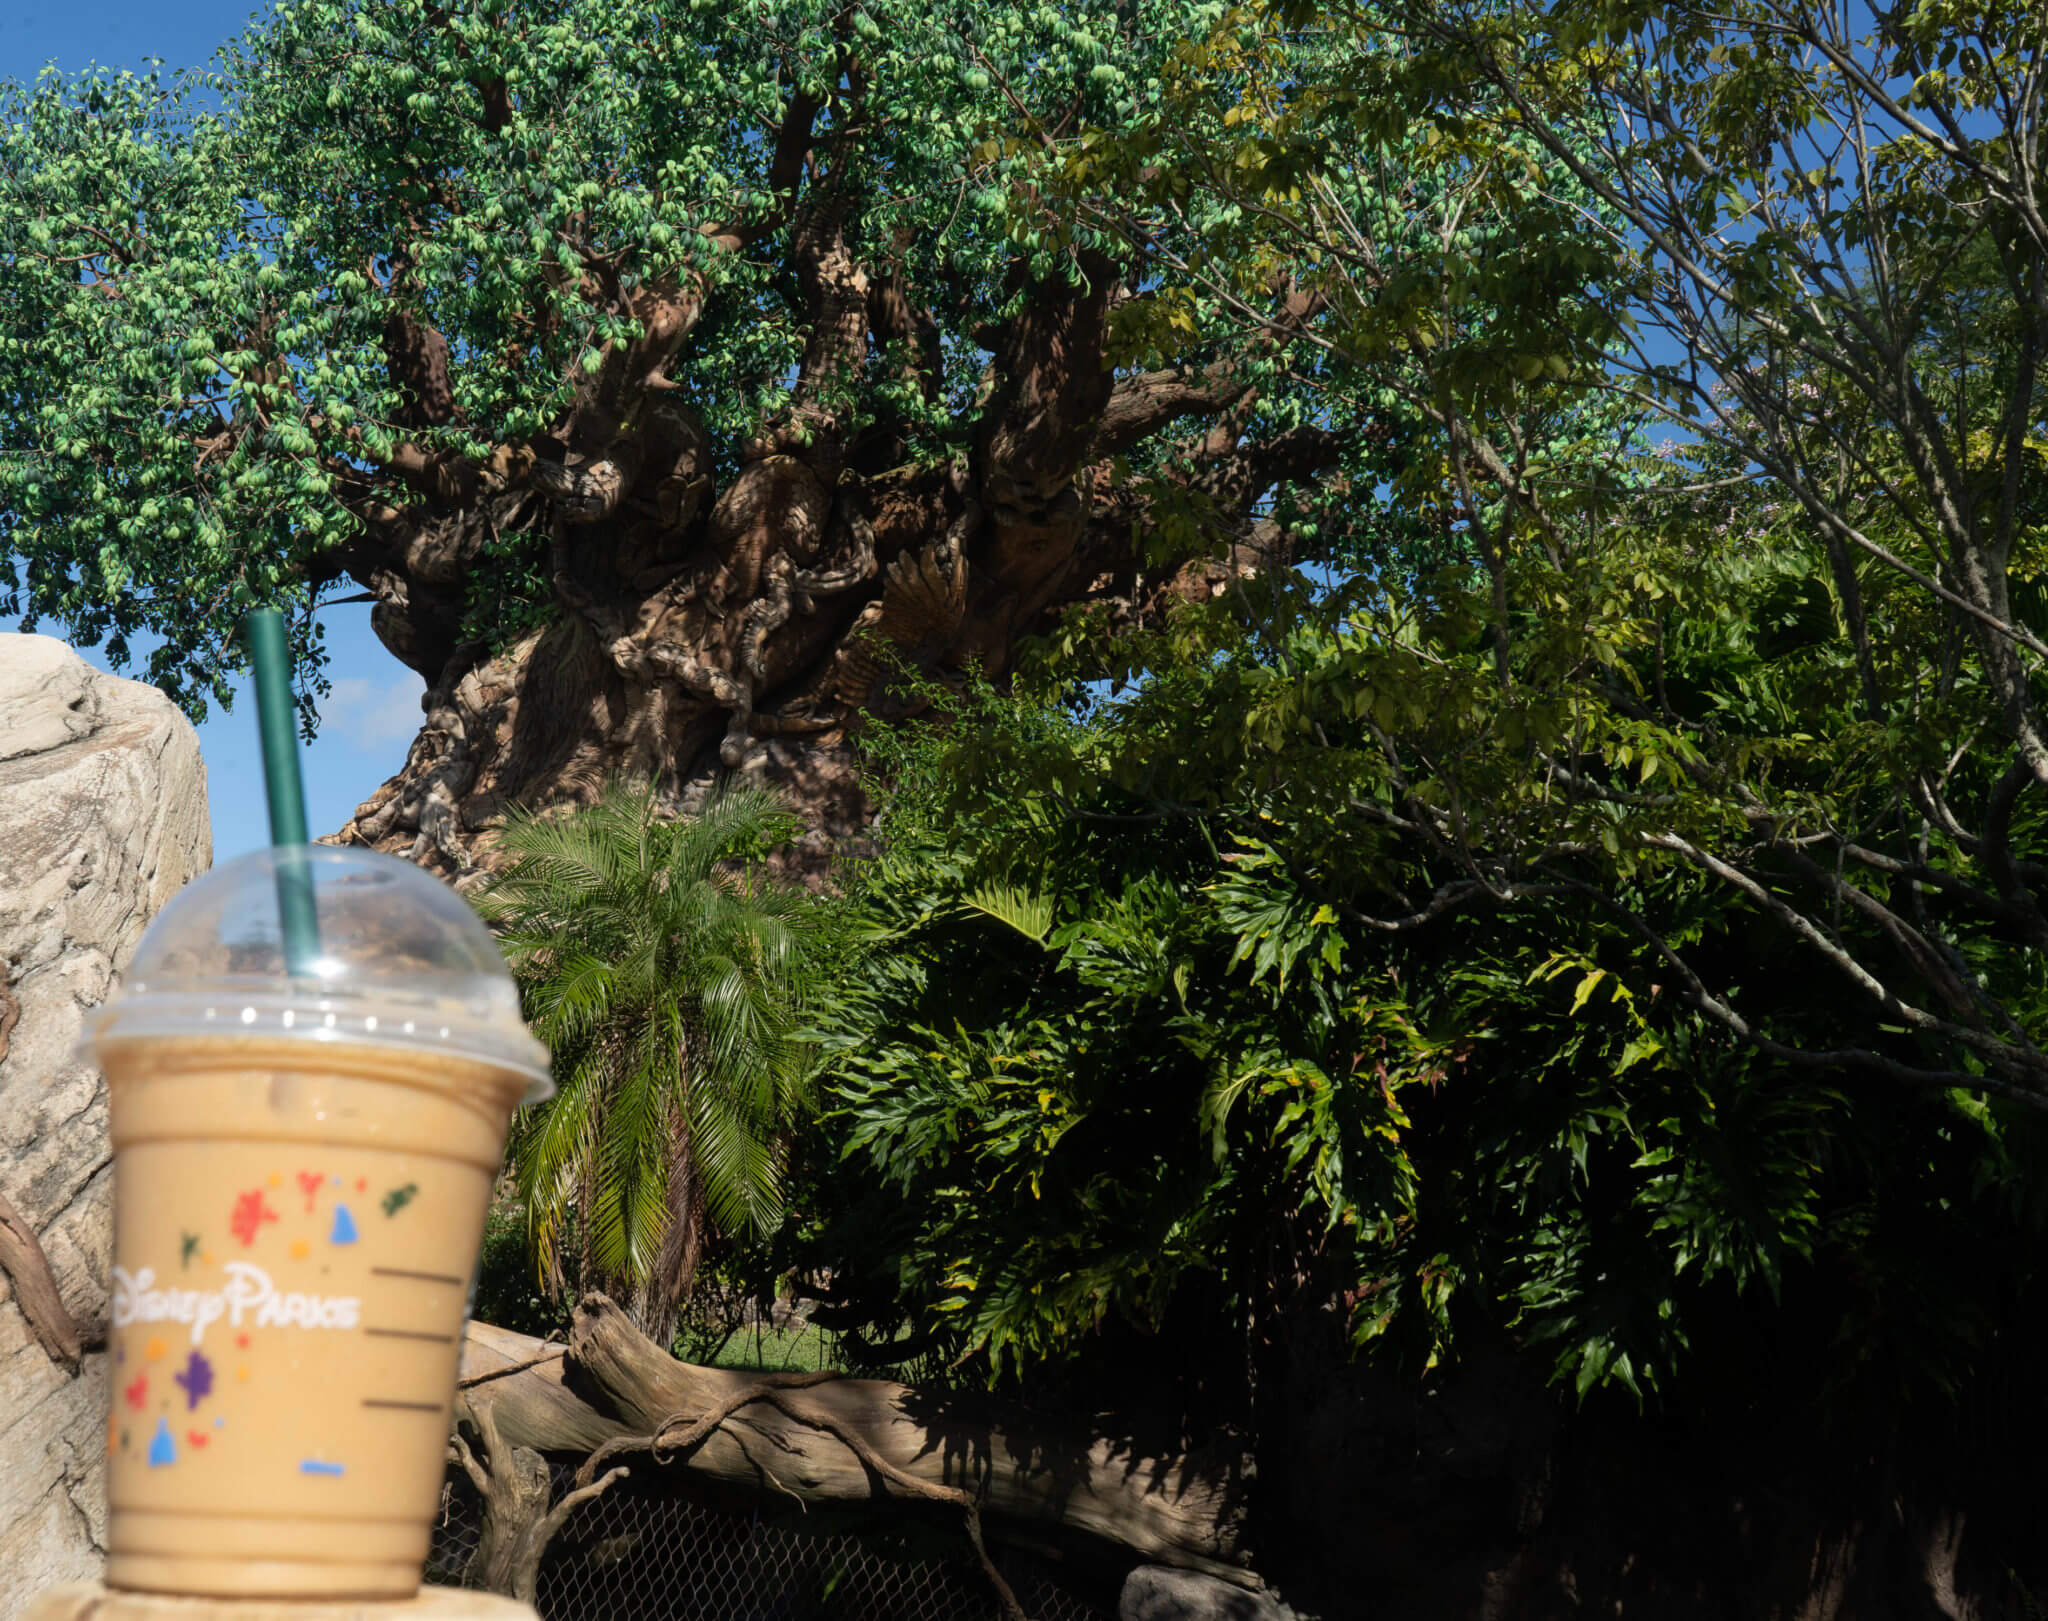 Iced Starbucks latte in front of Tree of Life at Animal Kingdom in Disney World